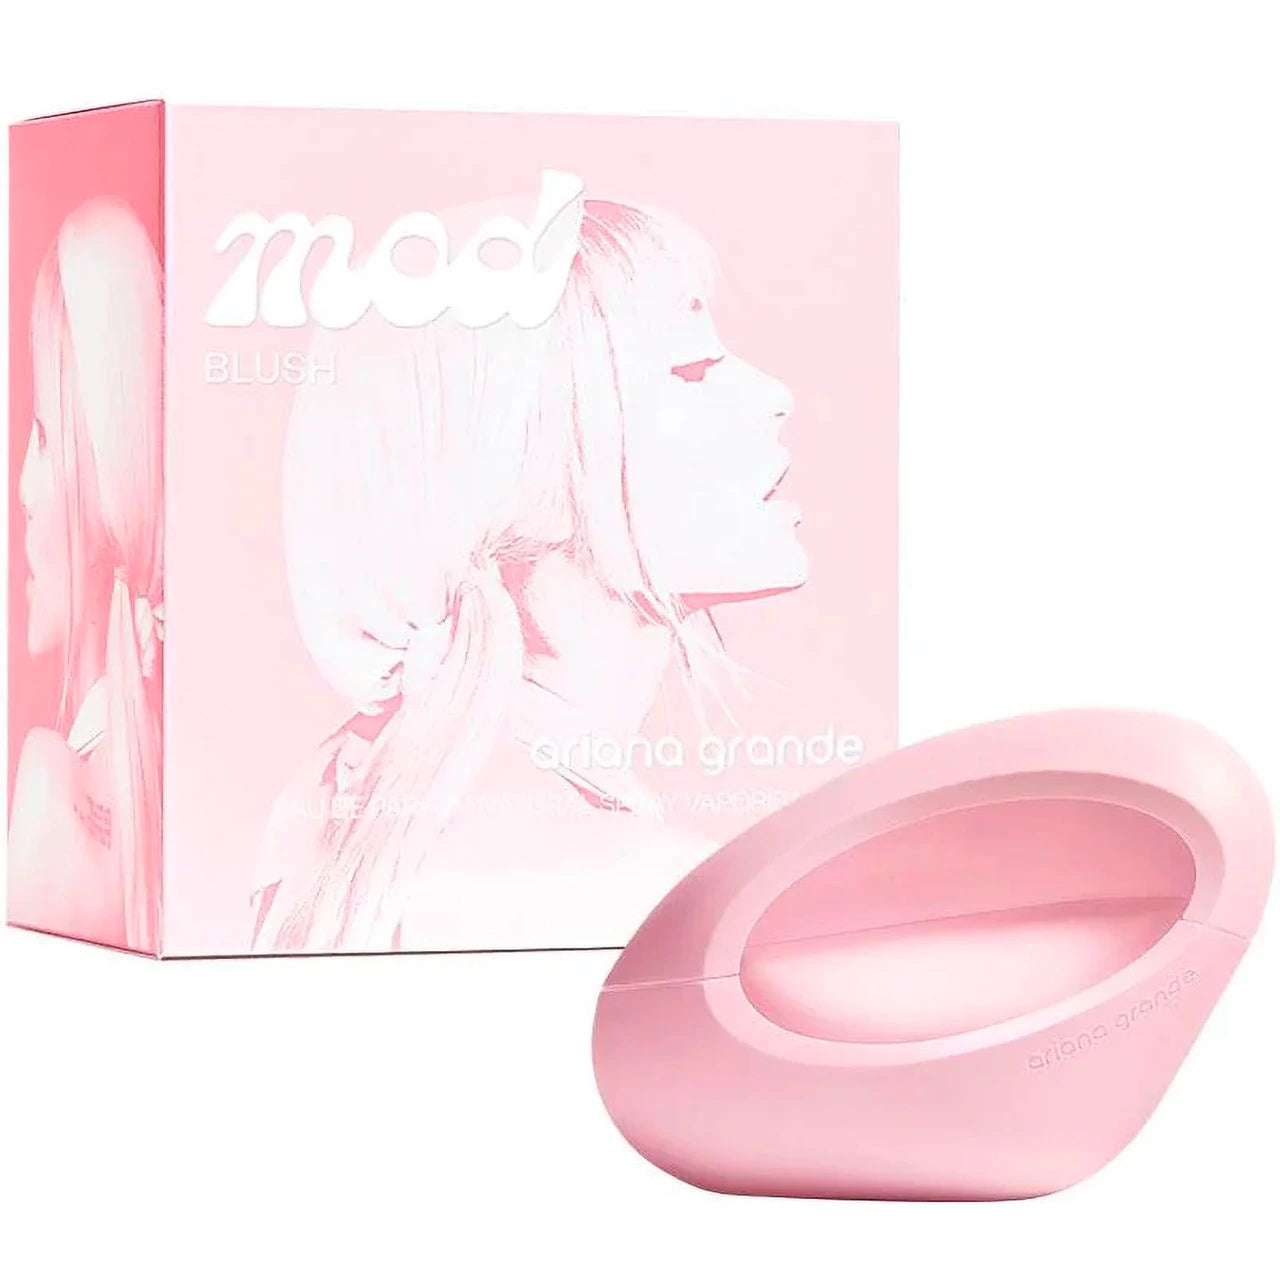 <p data-mce-fragment="1">Experience the allure of Mod Blush Eau de Parfum, opening with Bergamot, Passion Fruit, and bright Raspberry scents, and evolving to a bouquet of dewy Rose and Magnolia. Intimately luxurious, this cruelty-free and cleanly-crafted scent is complemented with Ambrox and Radiant Musk for a sumptuous and sophisticated signature.</p>